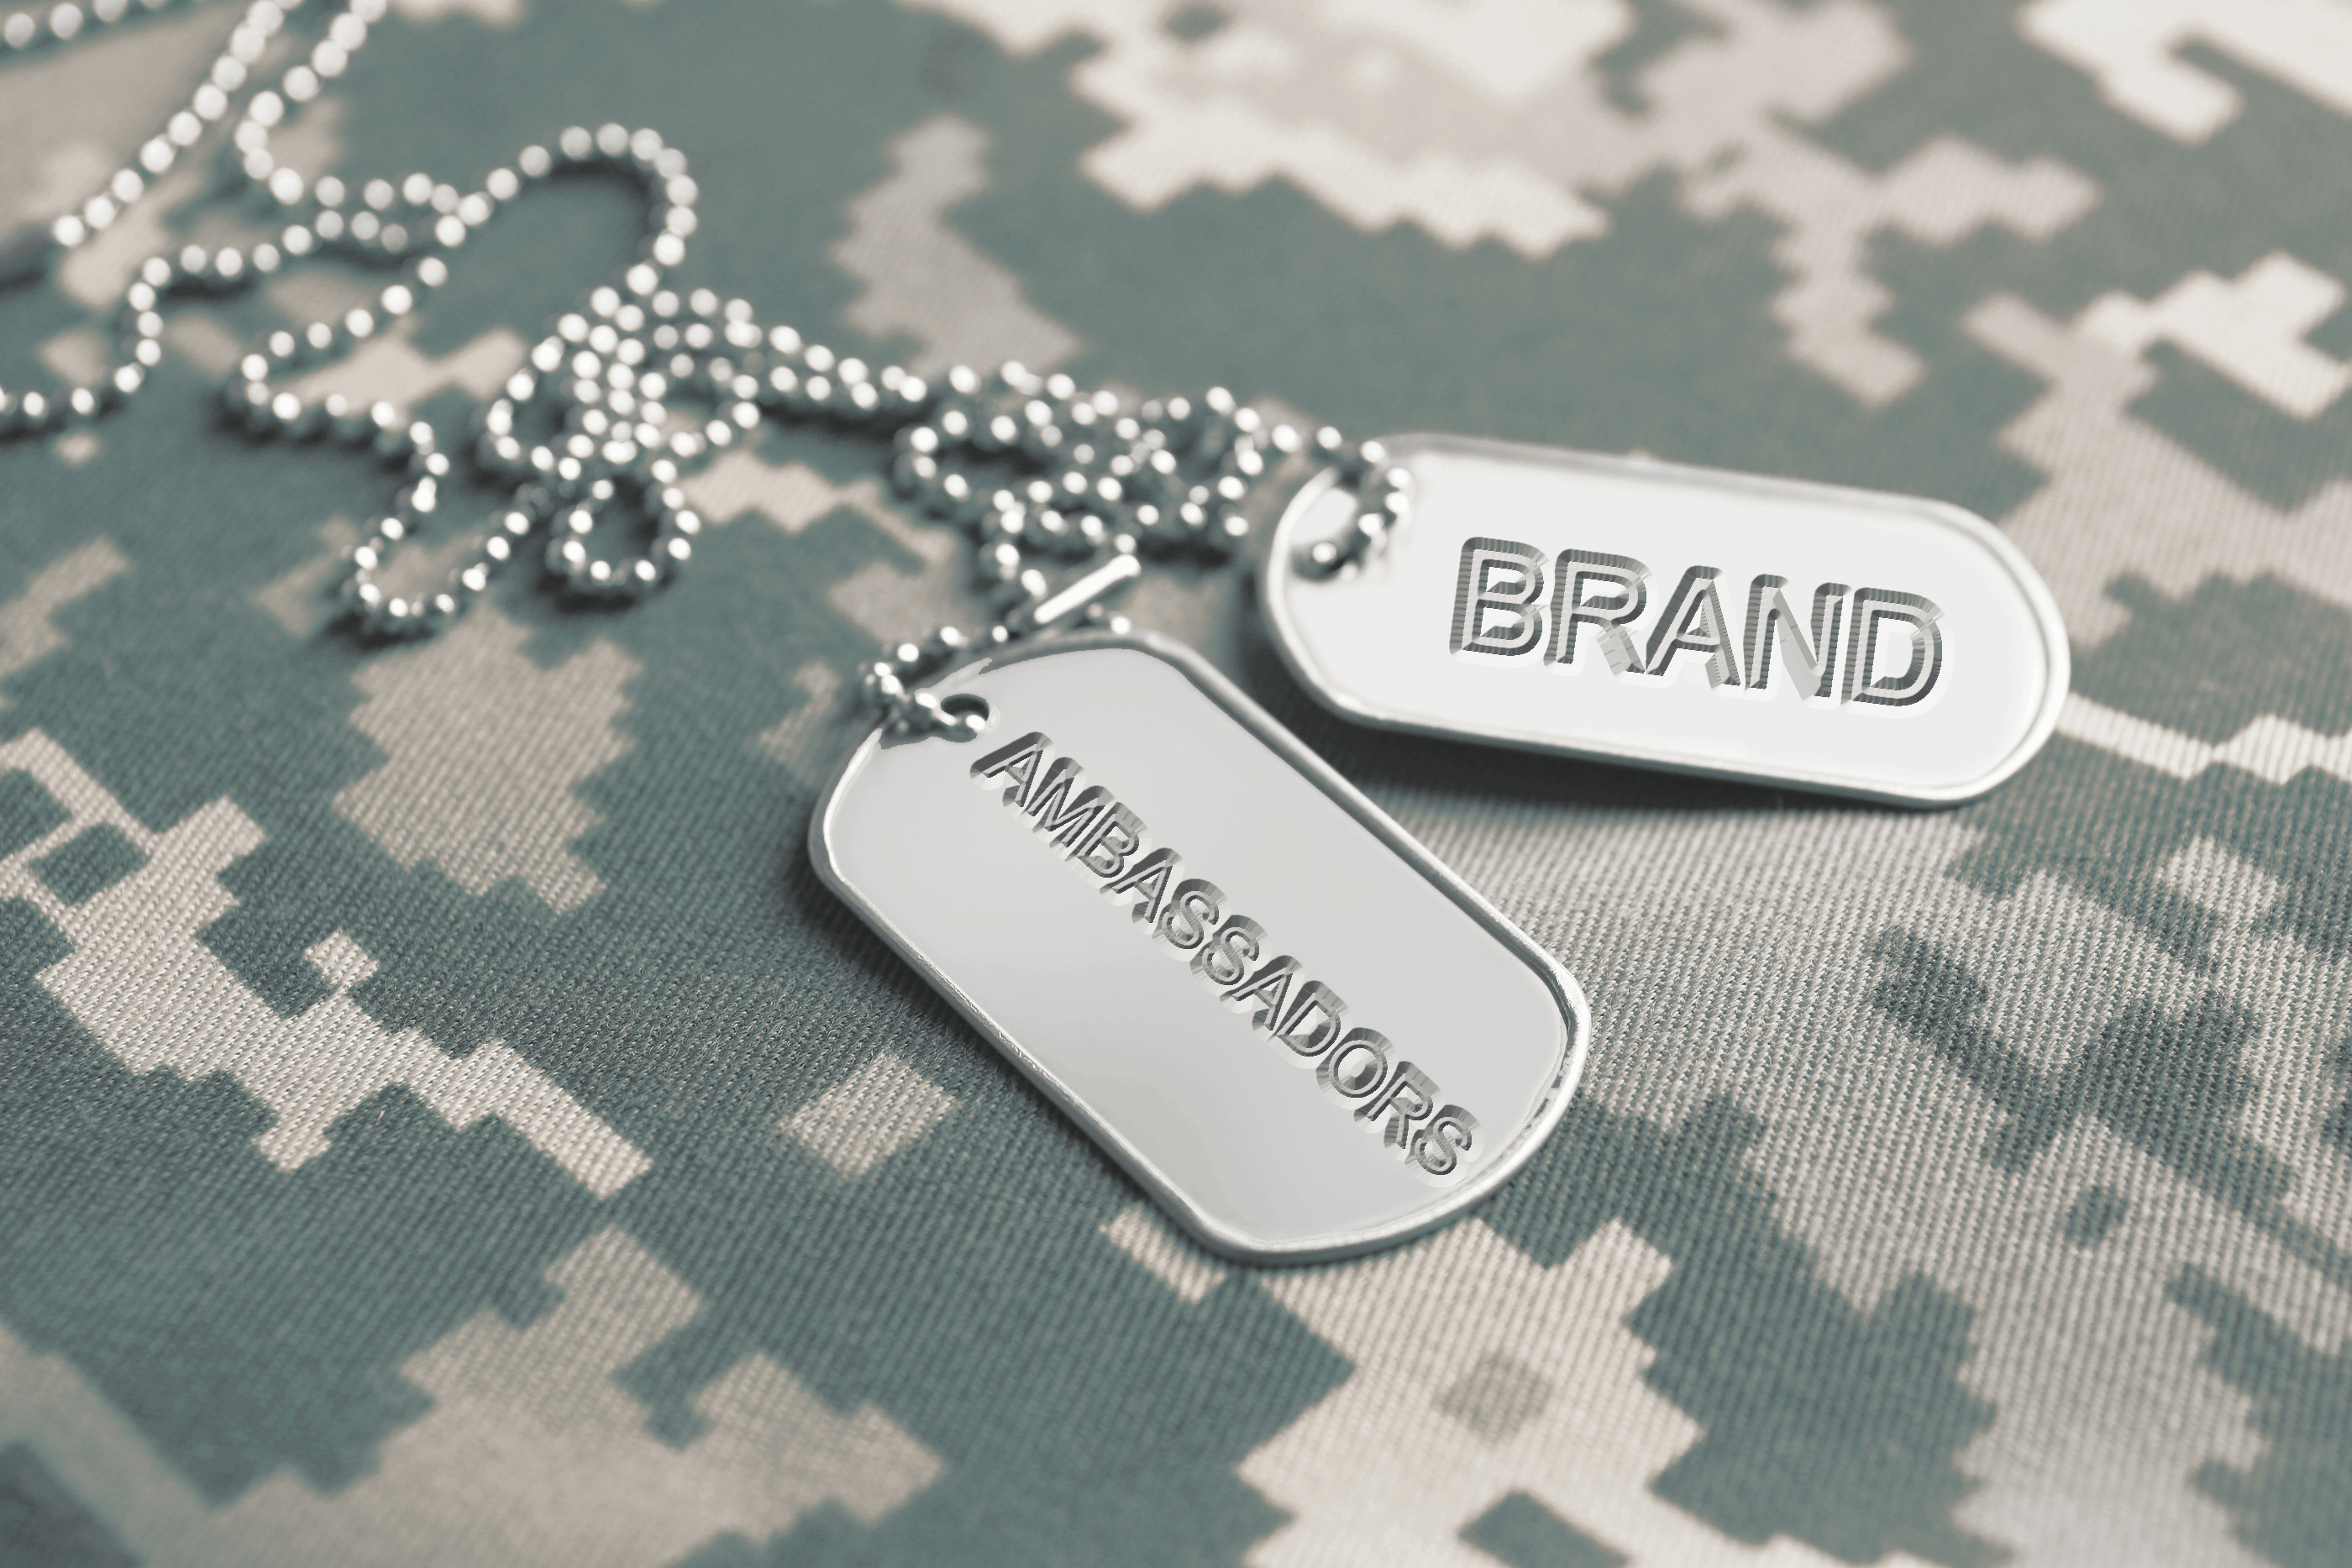 military dog tags with the words "brand ambassador" etched into them